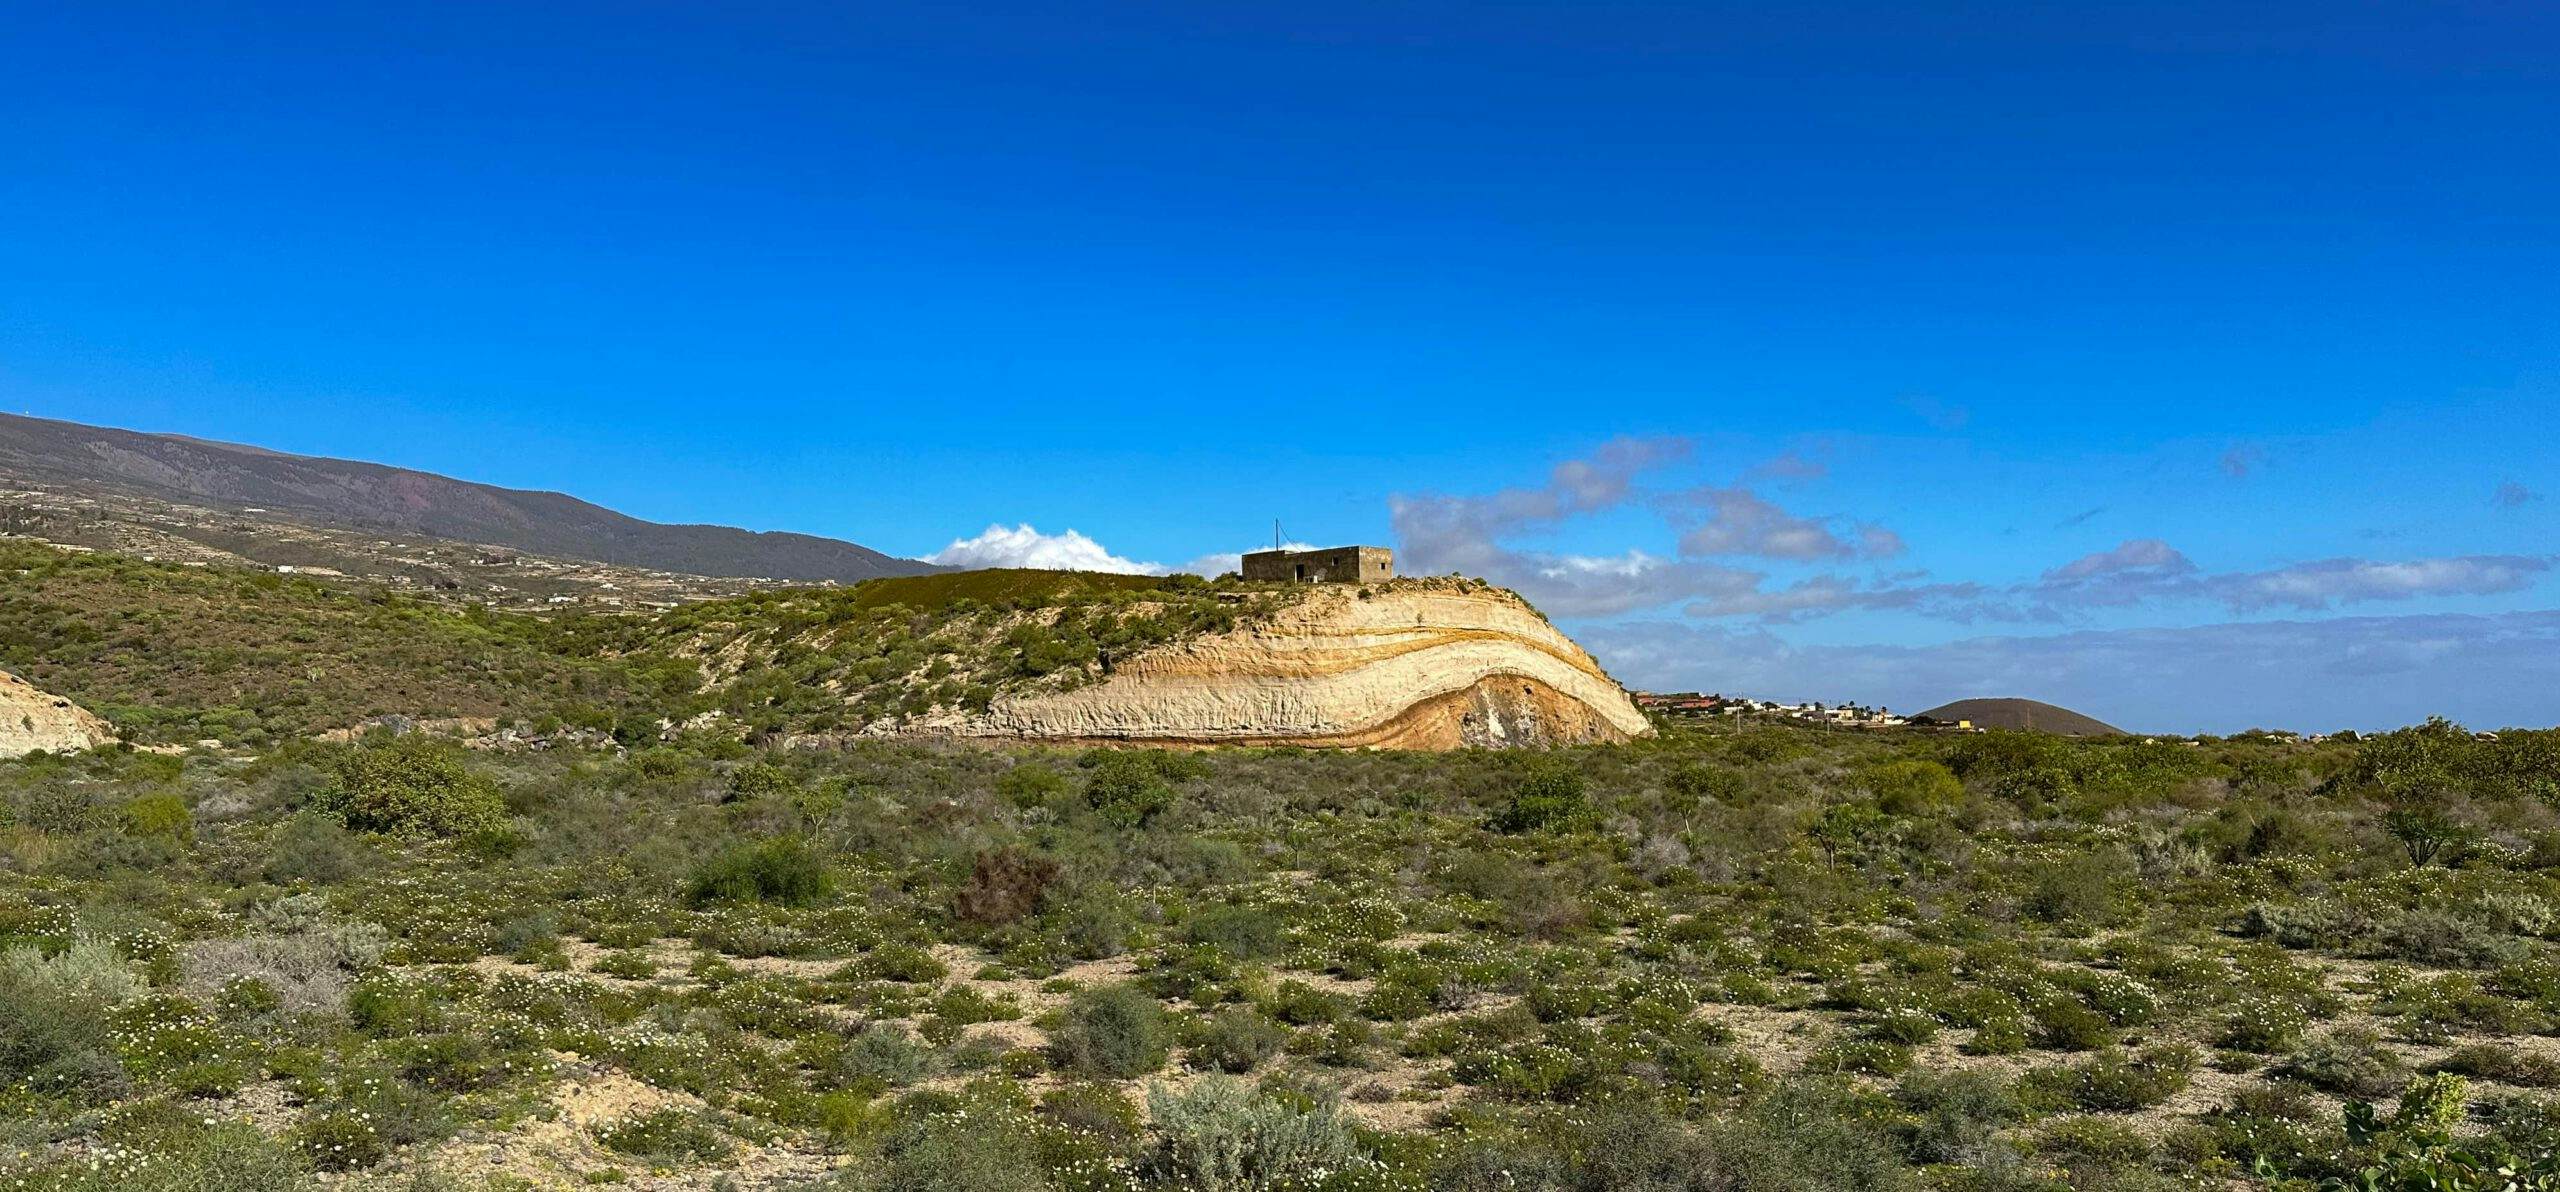 Wide landscape with impressive sand and rock formations near Icor - Camino Real del Sur